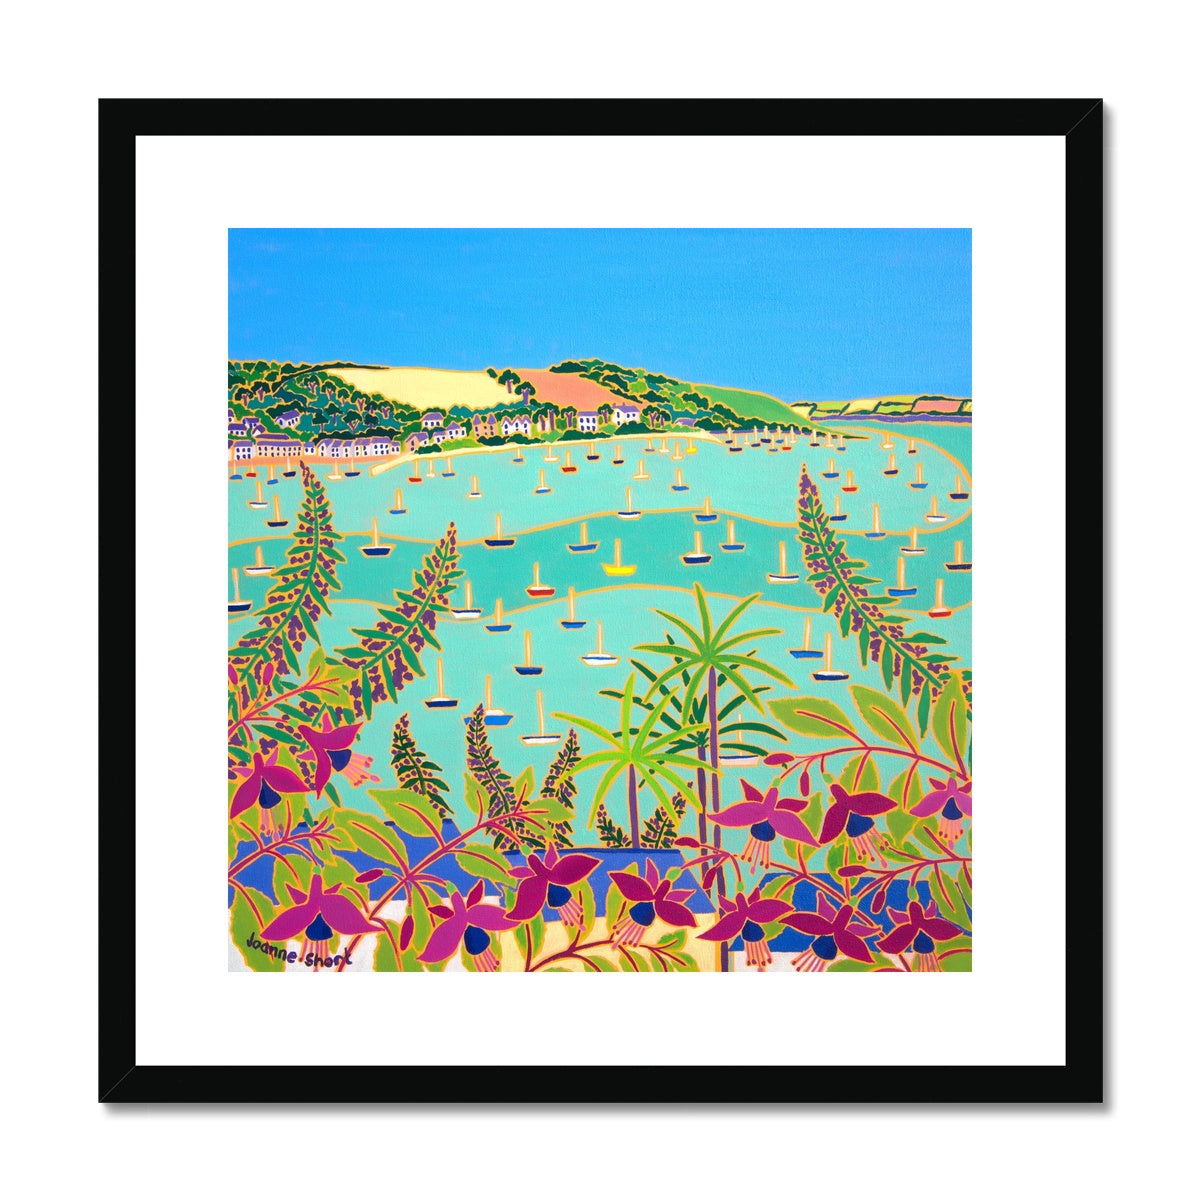 Joanne Short Framed Open Edition Cornish Fine Art Print. 'View through Summer Flowers to Trefusis Point, Falmouth'. Cornwall Art Gallery